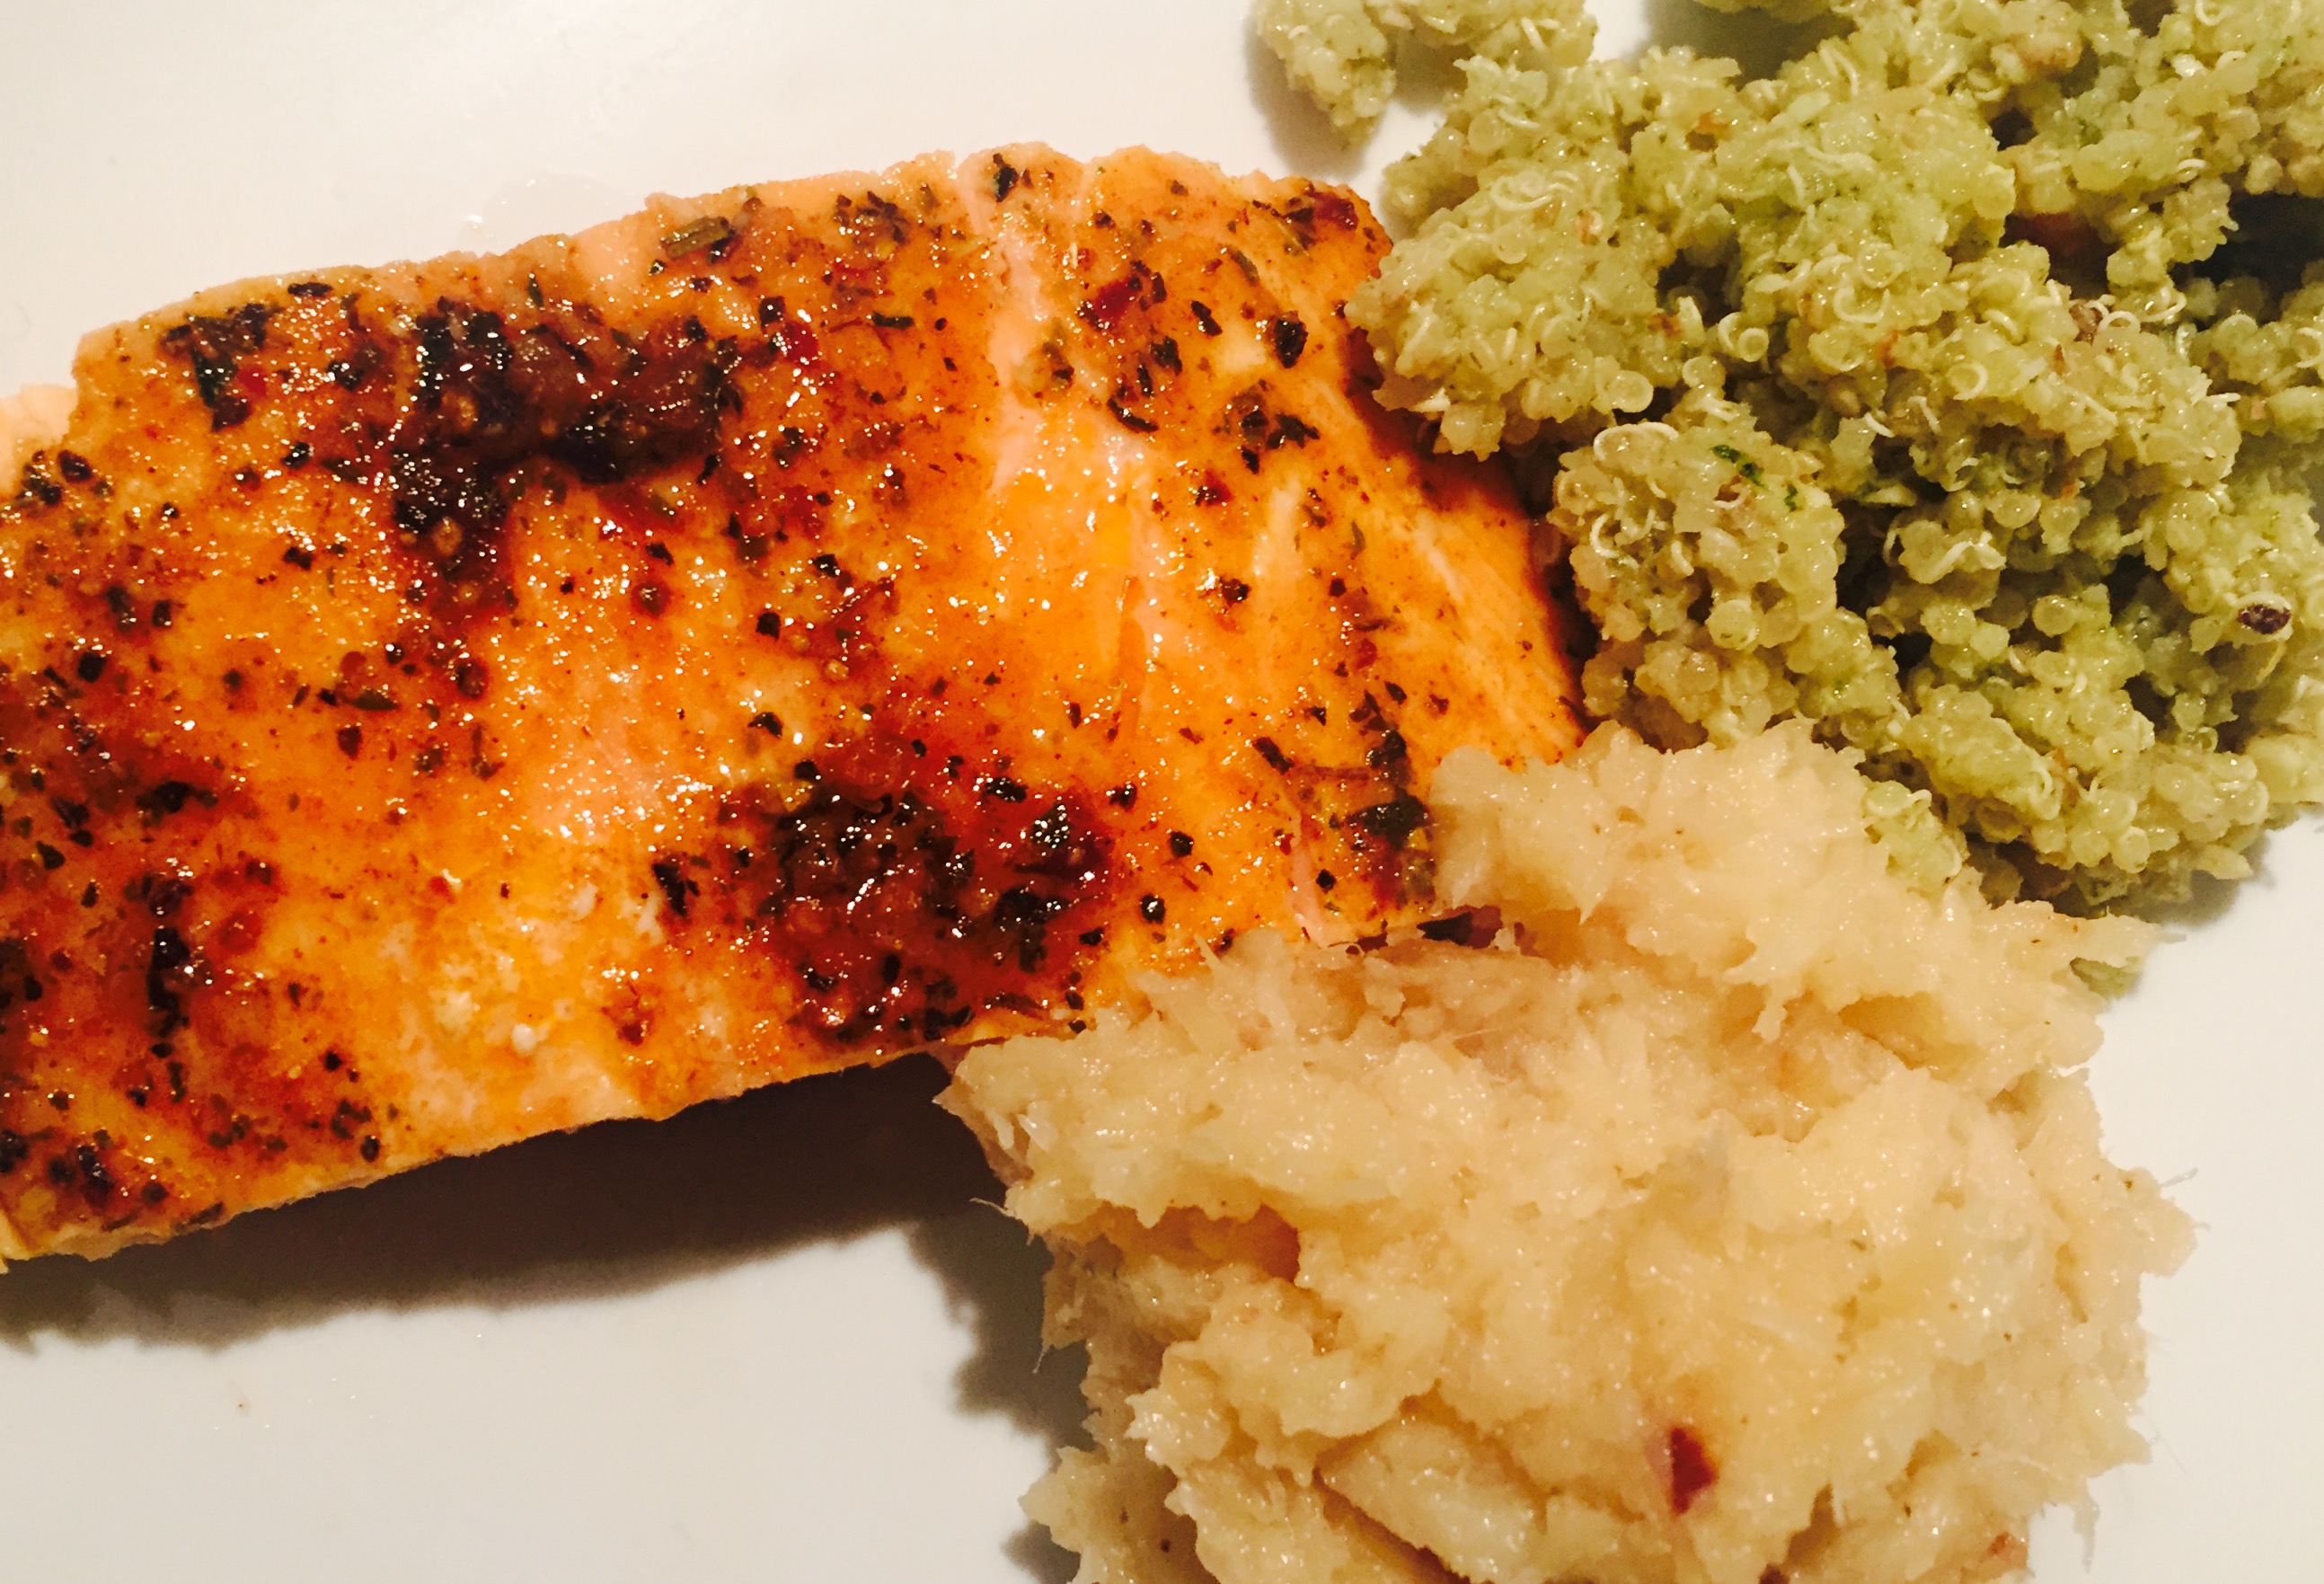 Broiled Salmon with Mashed Parsnips and Pesto Quinoa